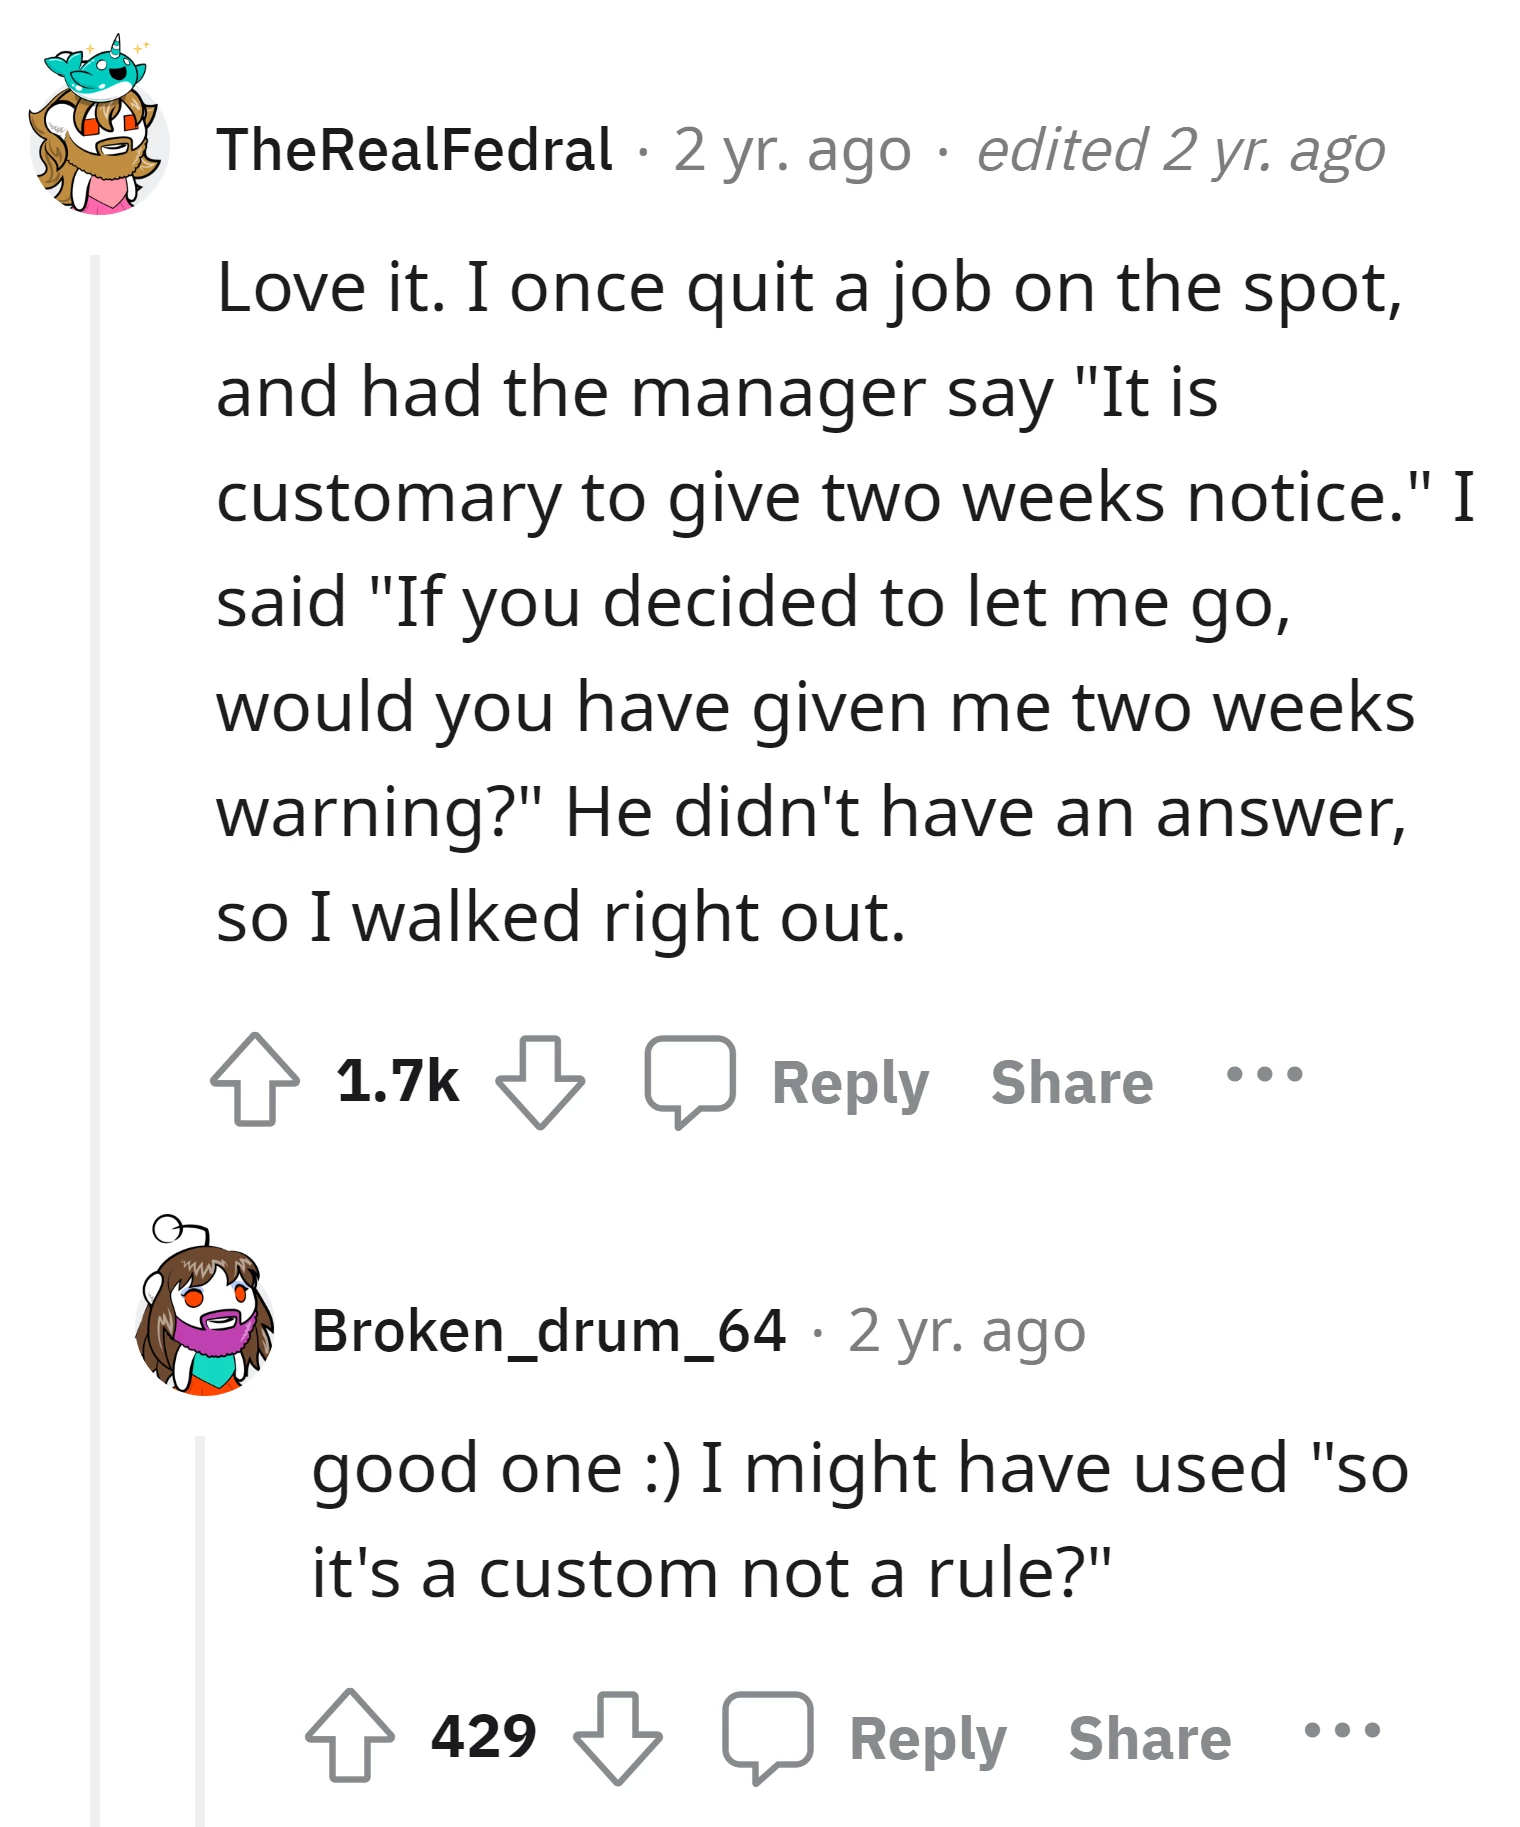 This commenter shares a story of quitting a job on the spot